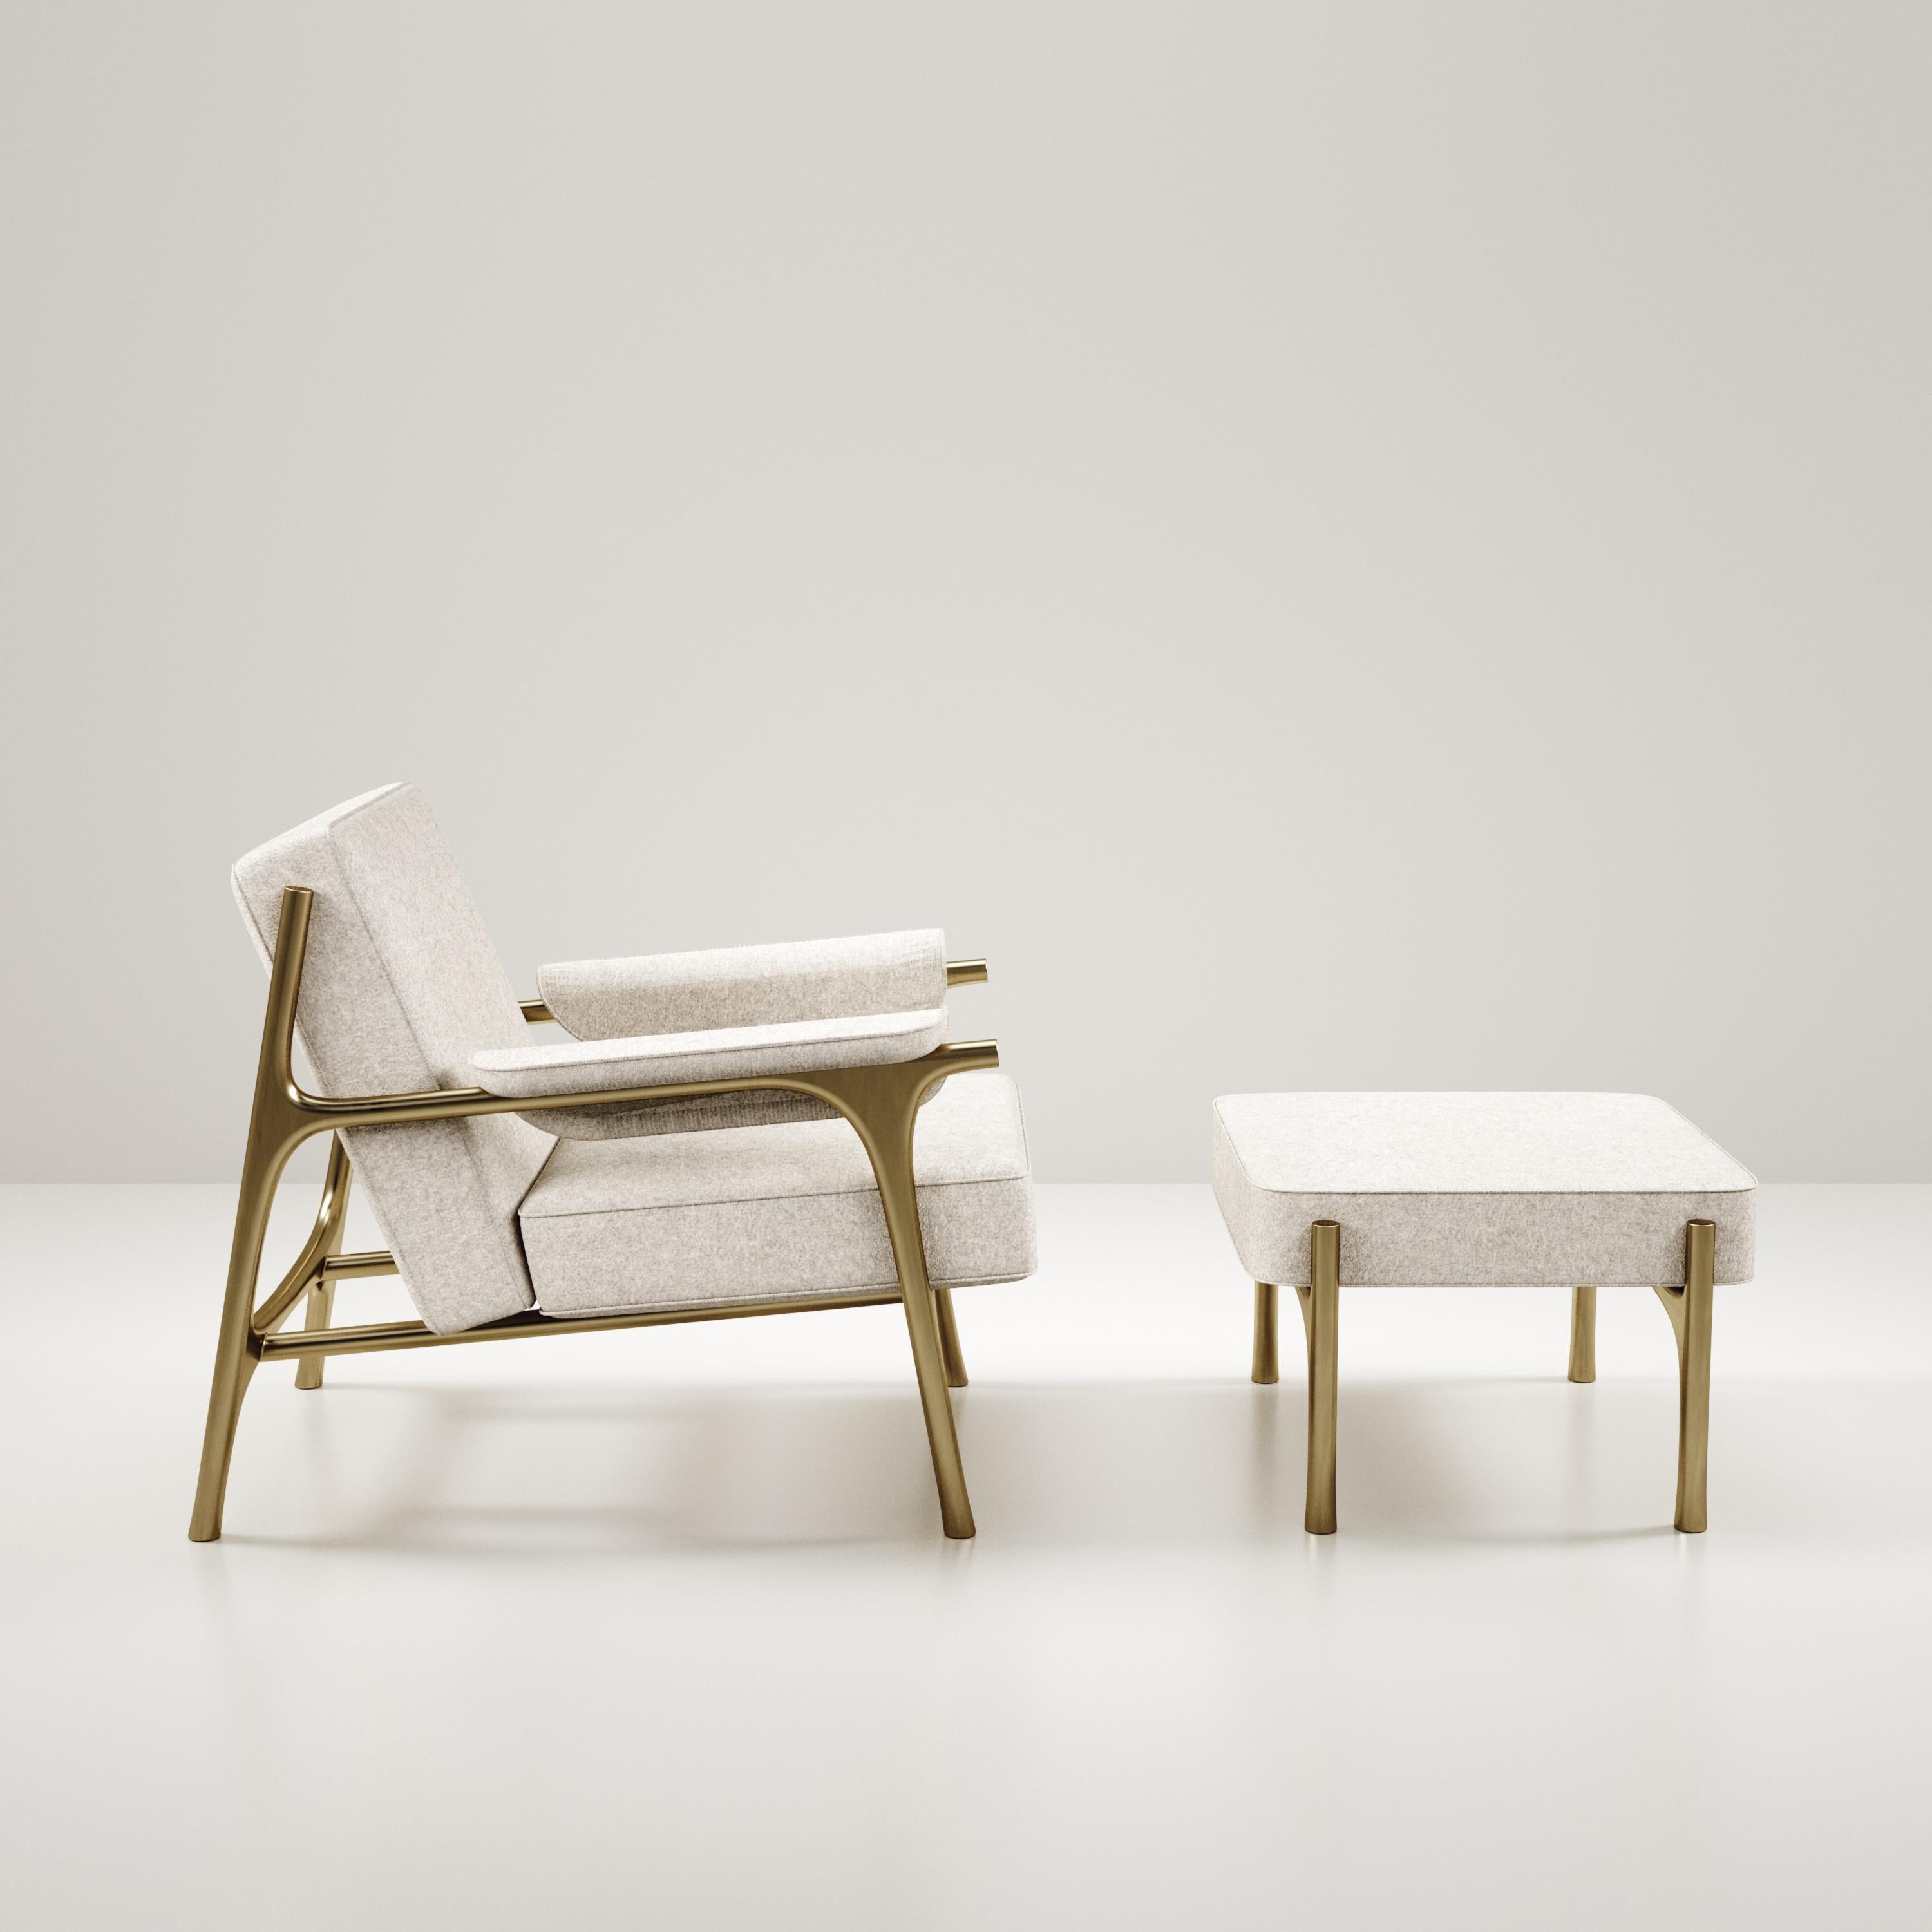 The Ramo armchair & footstool set by R & Y Augousti is an elegant and versatile piece. The upholstered pieces provide comfort while retaining a unique aesthetic with the bronze-patina brass frame and details. This listing is priced for client COM